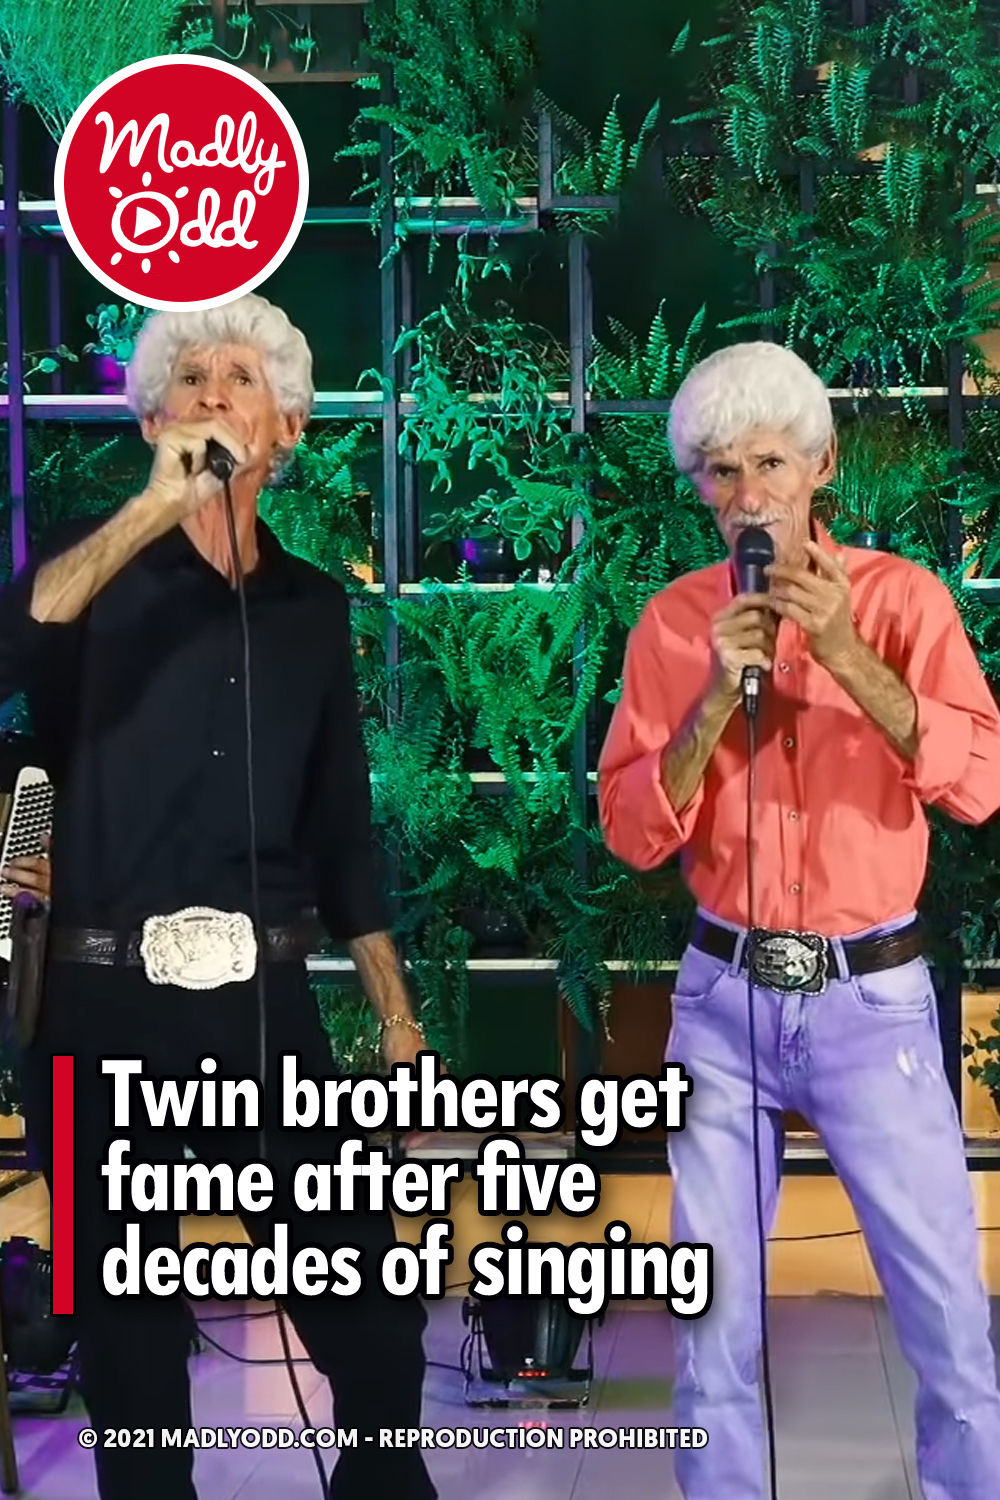 Twin brothers get fame after five decades of singing